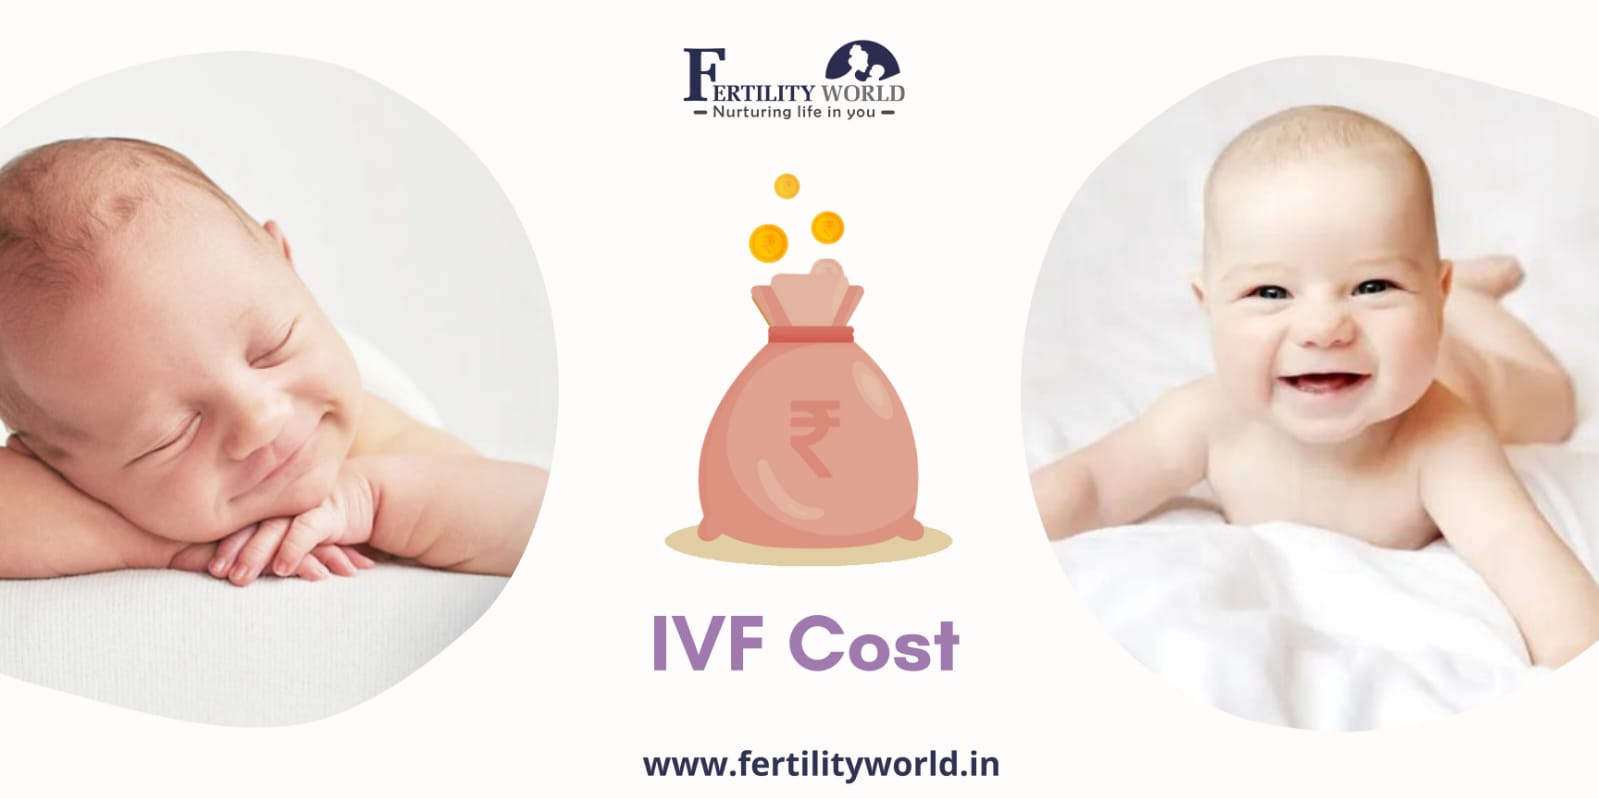 What is the IVF cost in Surat?